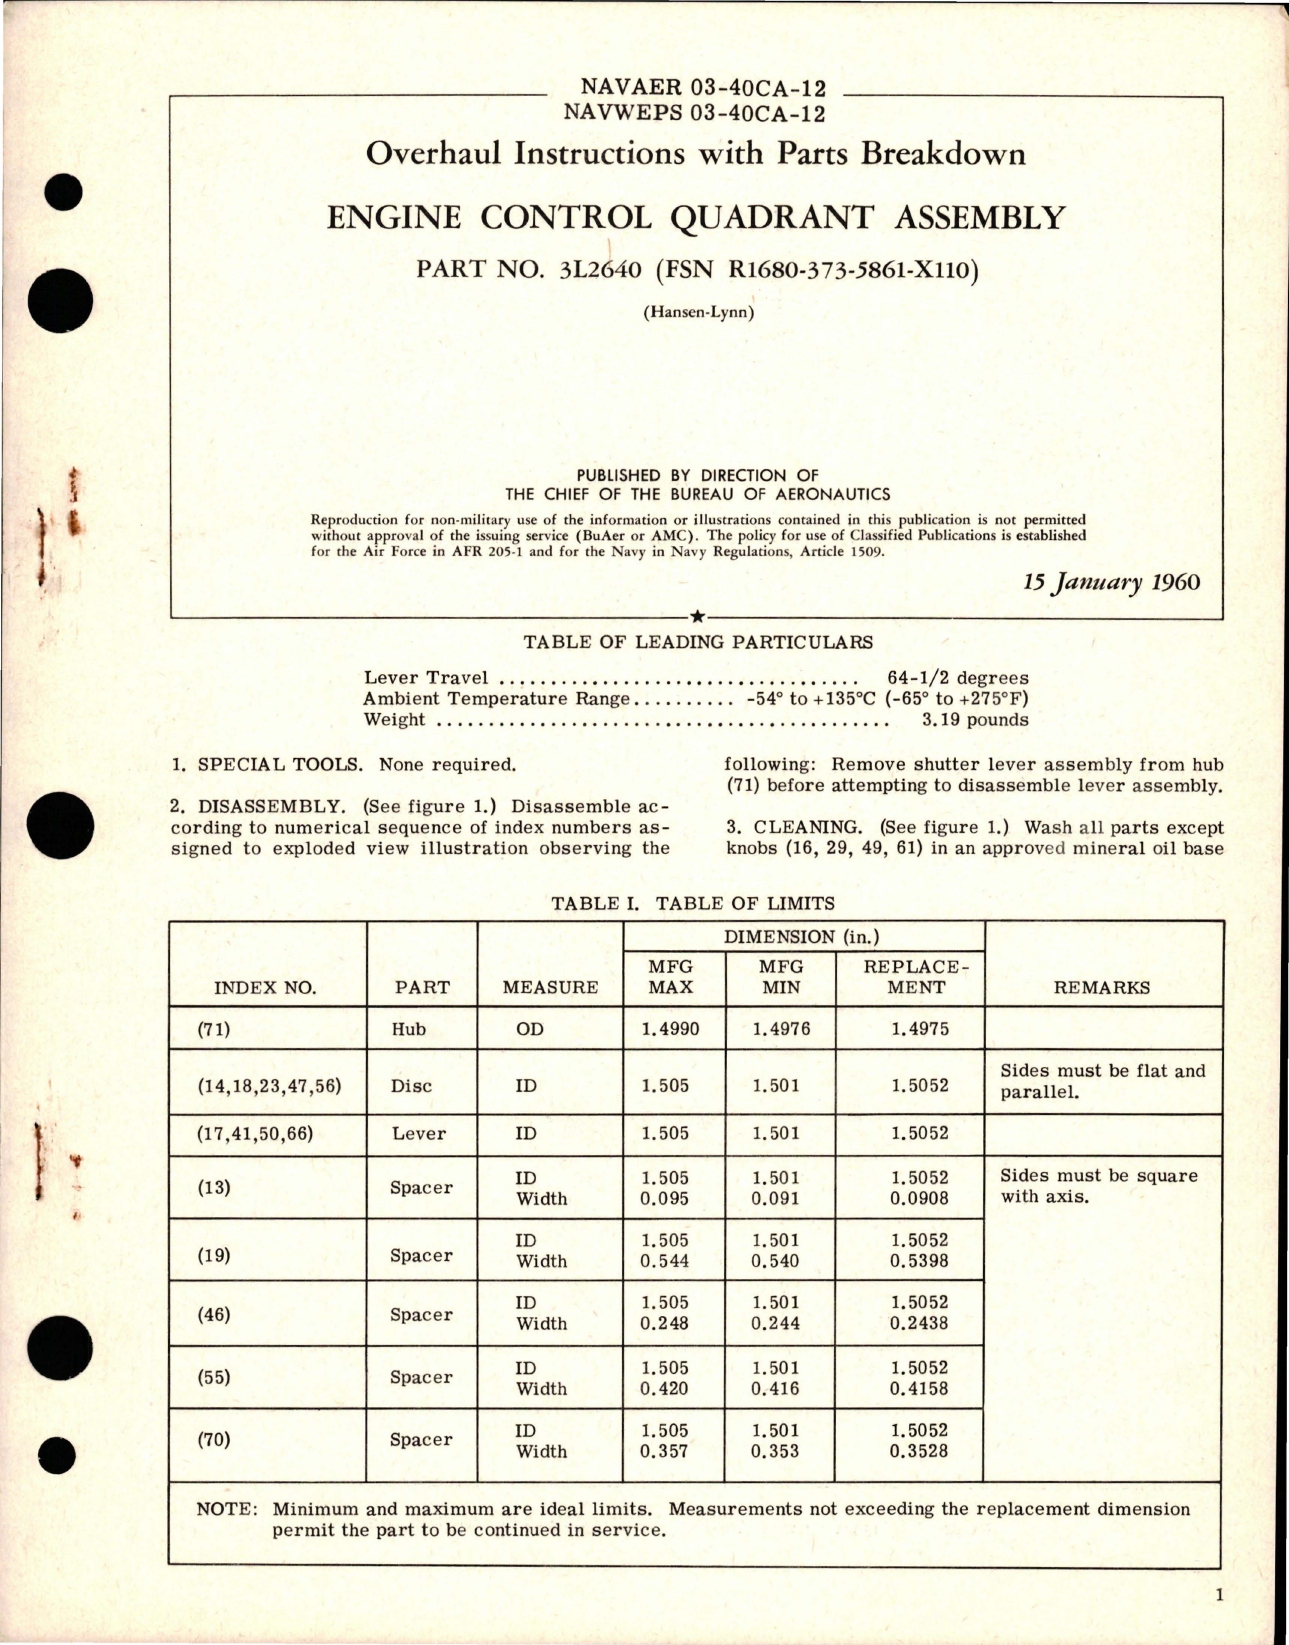 Sample page 1 from AirCorps Library document: Overhaul Instructions with Parts Breakdown for Engine Control Quadrant Assembly - Part 3L3640